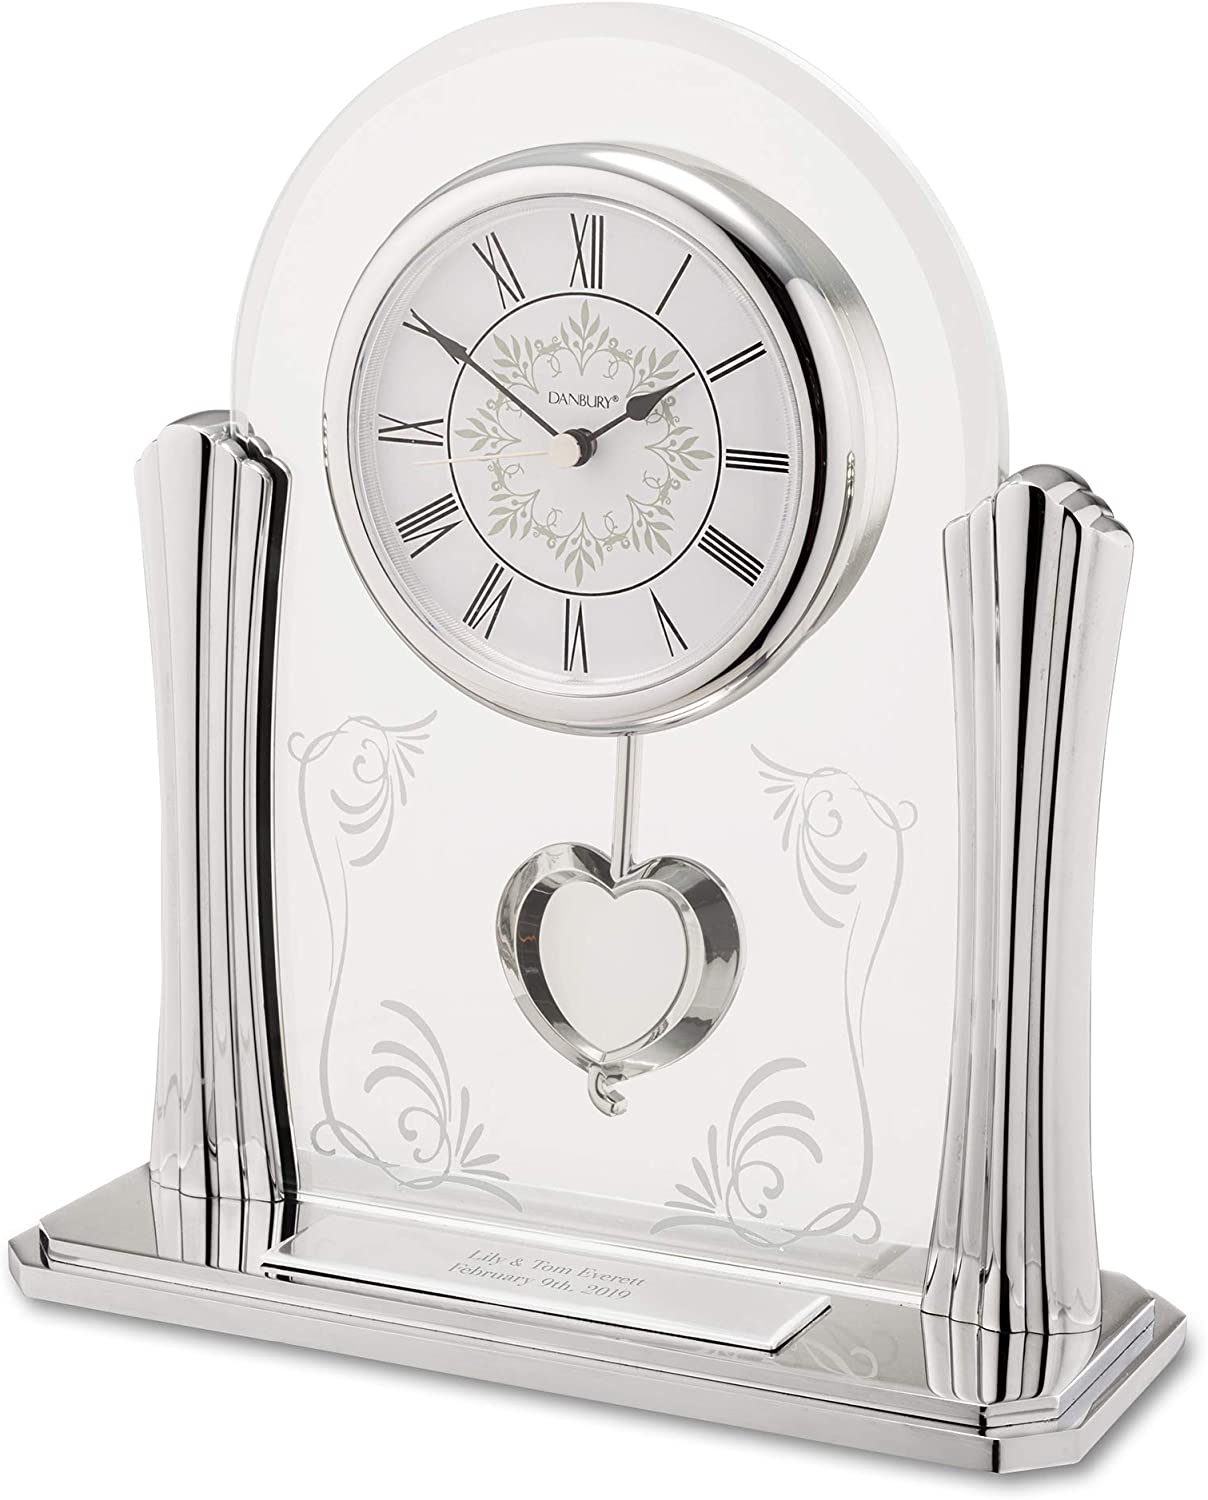 Things Remembered Personalized Wedding Pendulum Clock with Engraving Included